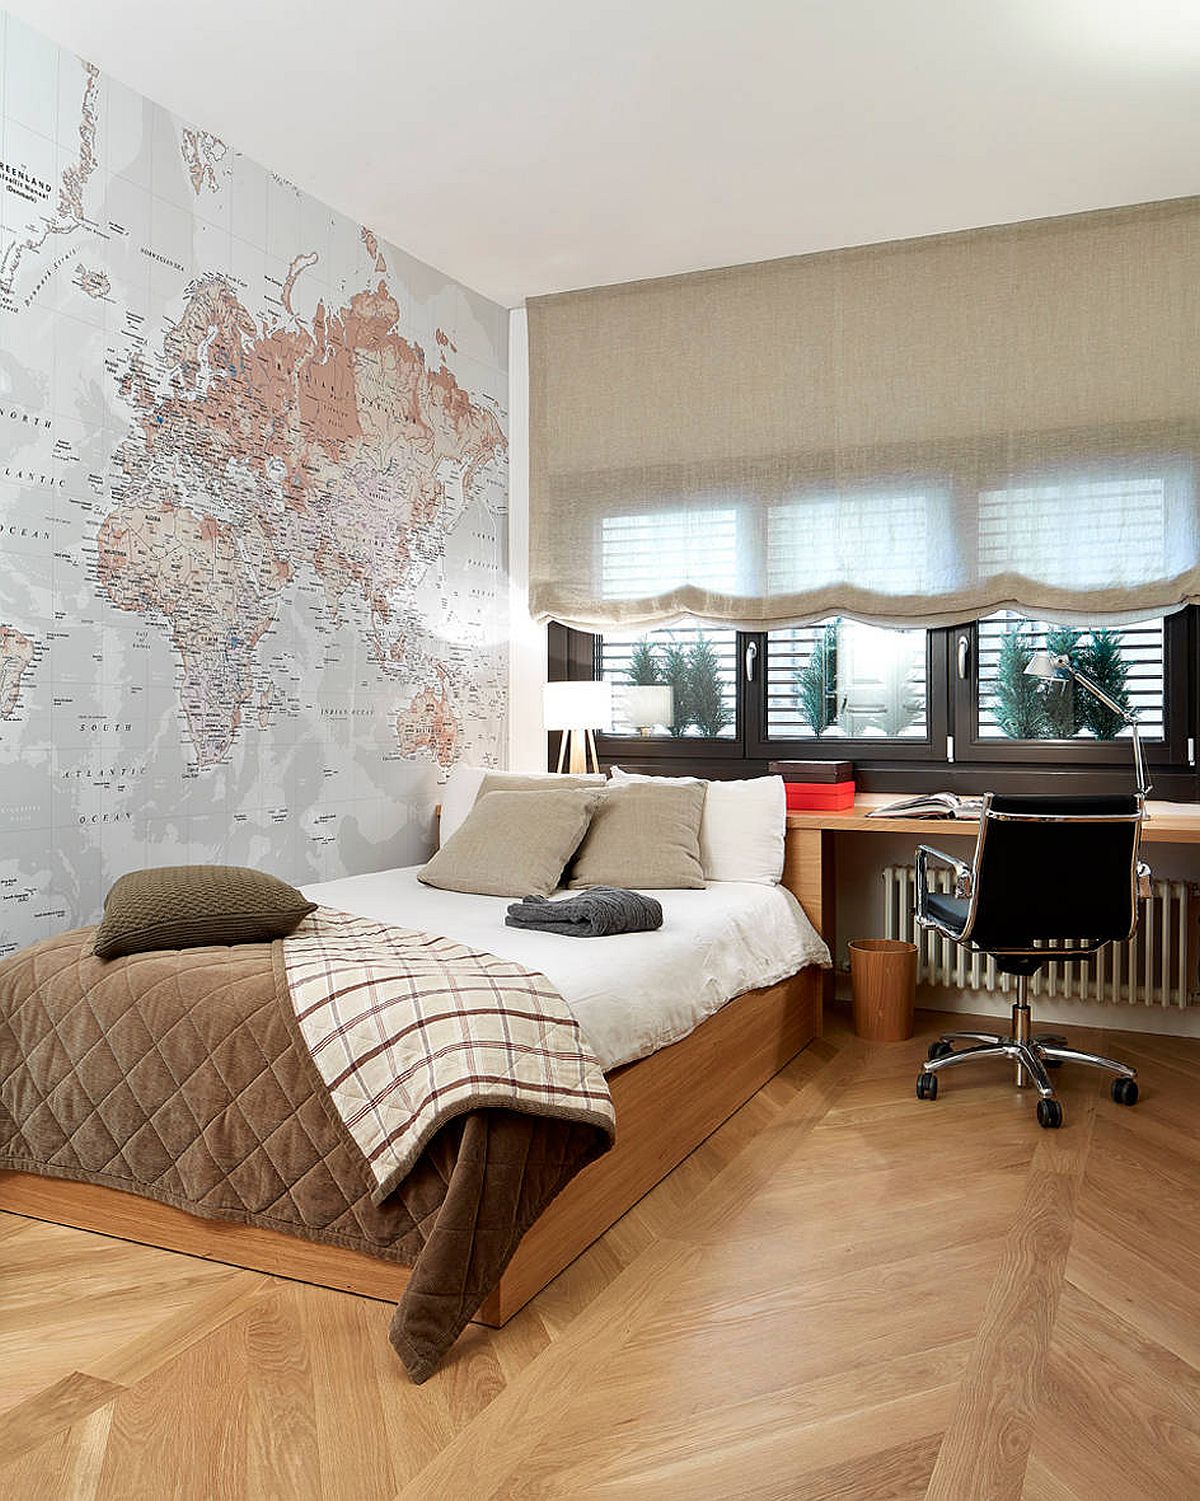 Space-savvy modern bedroom where the map on the wall becomes the focal point